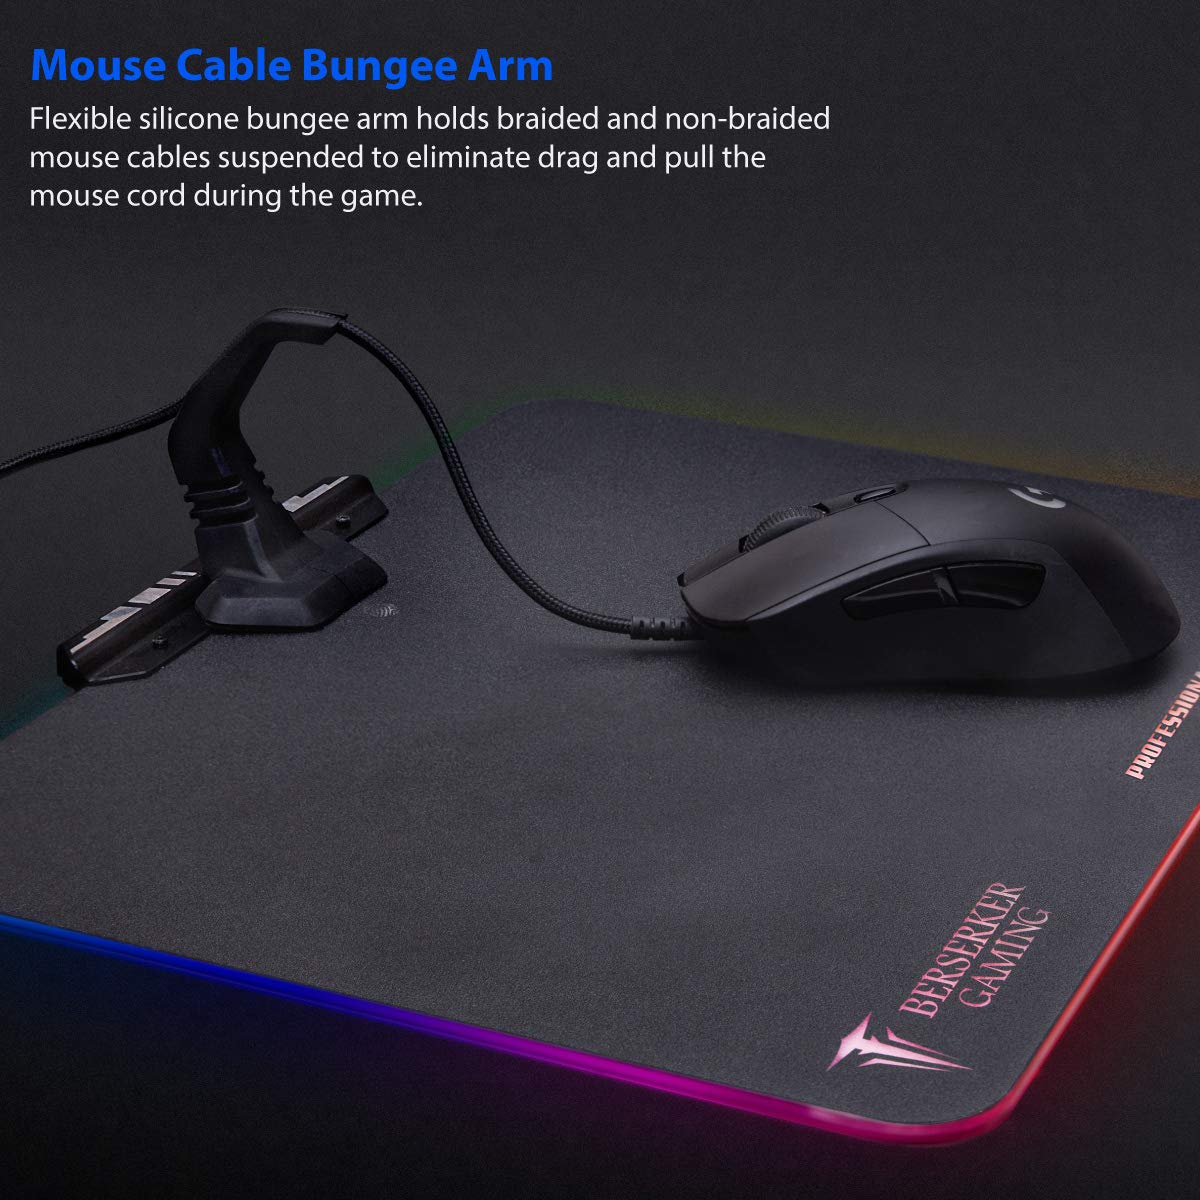 Large RGB LED Gaming Mouse Pad Hard Micro Texture Surface -7 Light Up Modes - Mouse Bungee Cable Manager Holder Attachment - PC; Mac; Linux